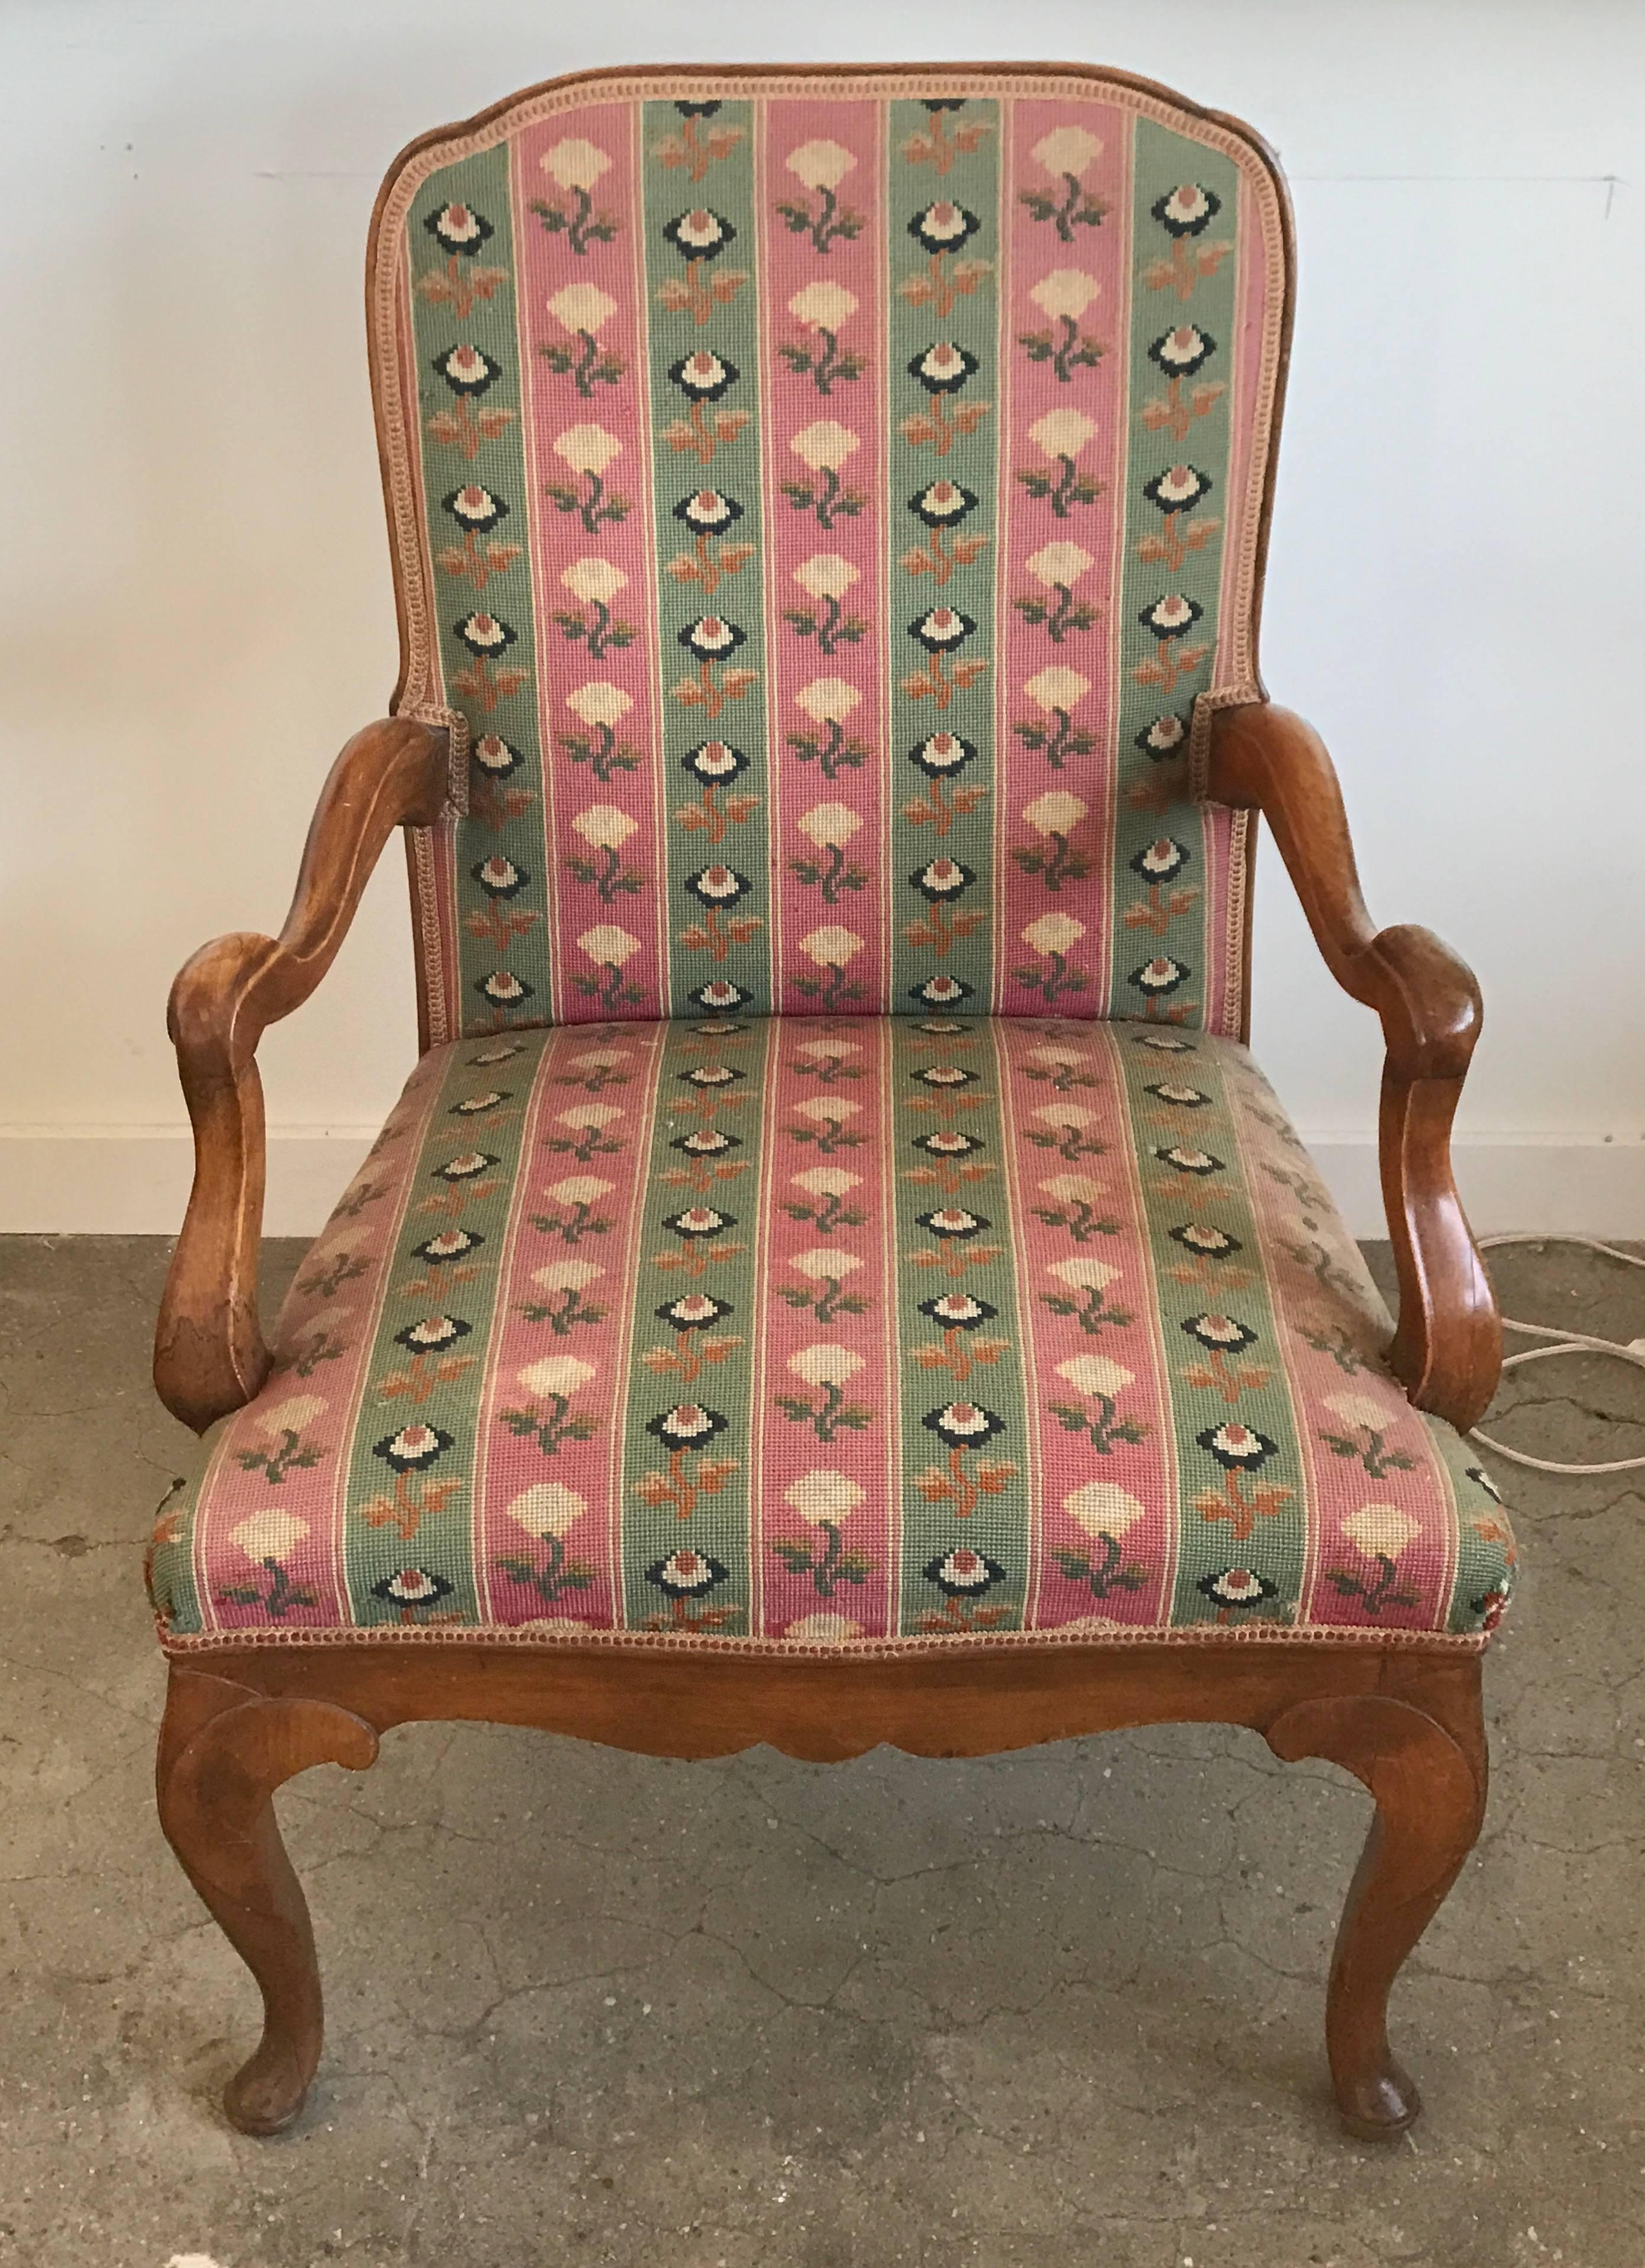 19th century fruitwood armchair with upholstered seat and back.